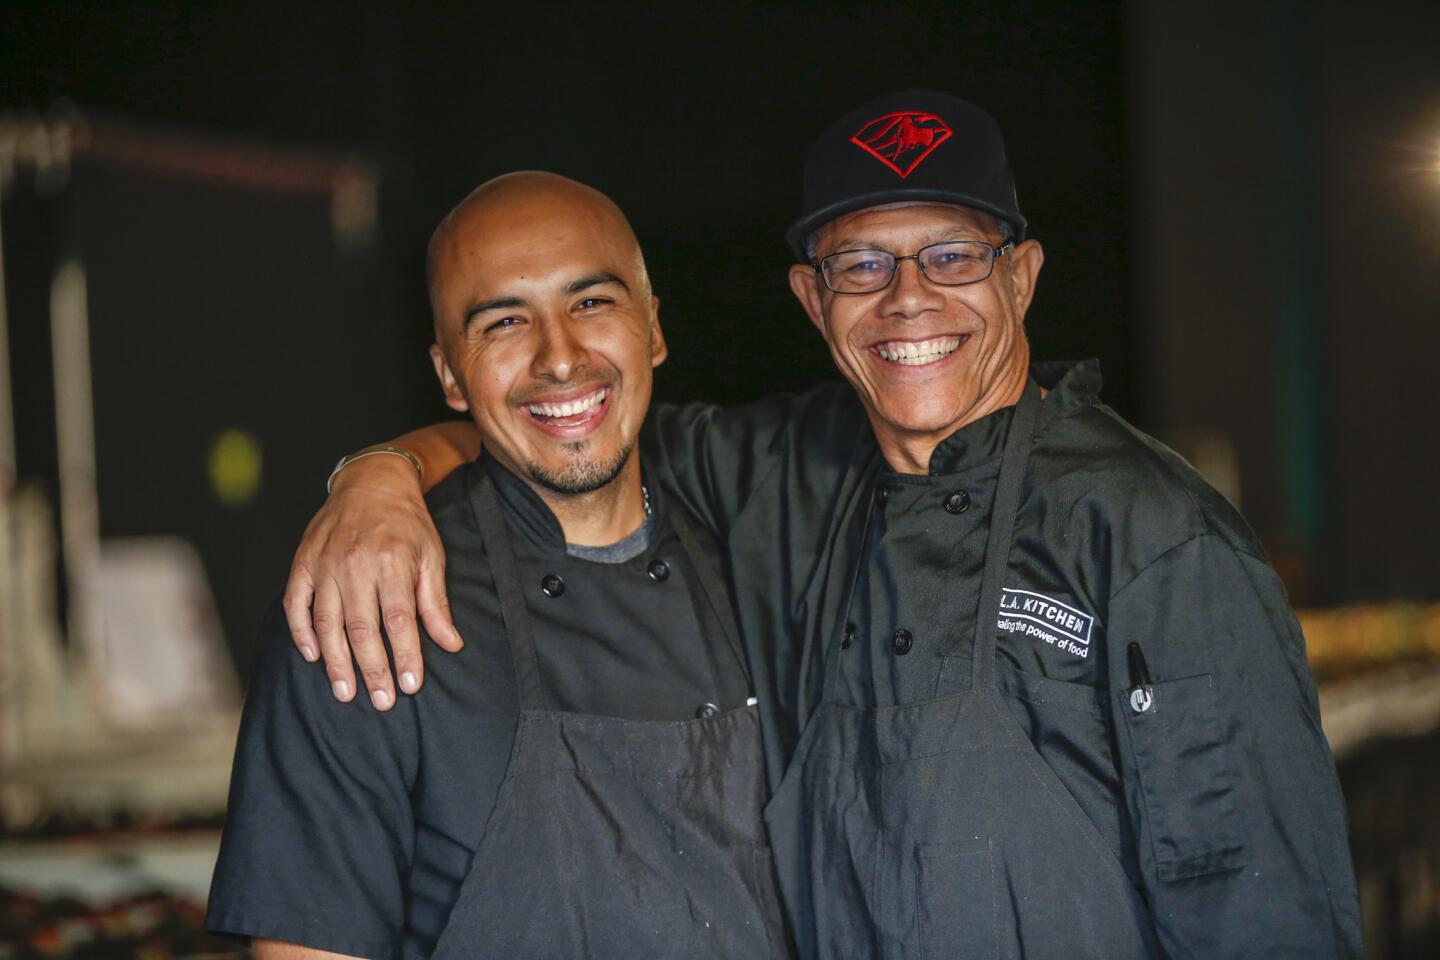 Edgar Ulisses Flores, left, and James Rich were trained by L.A. Kitchen, whose students include the formerly incarcerated or homeless. The men were part of the small army preparing the meal for the Emmys Governors Ball.